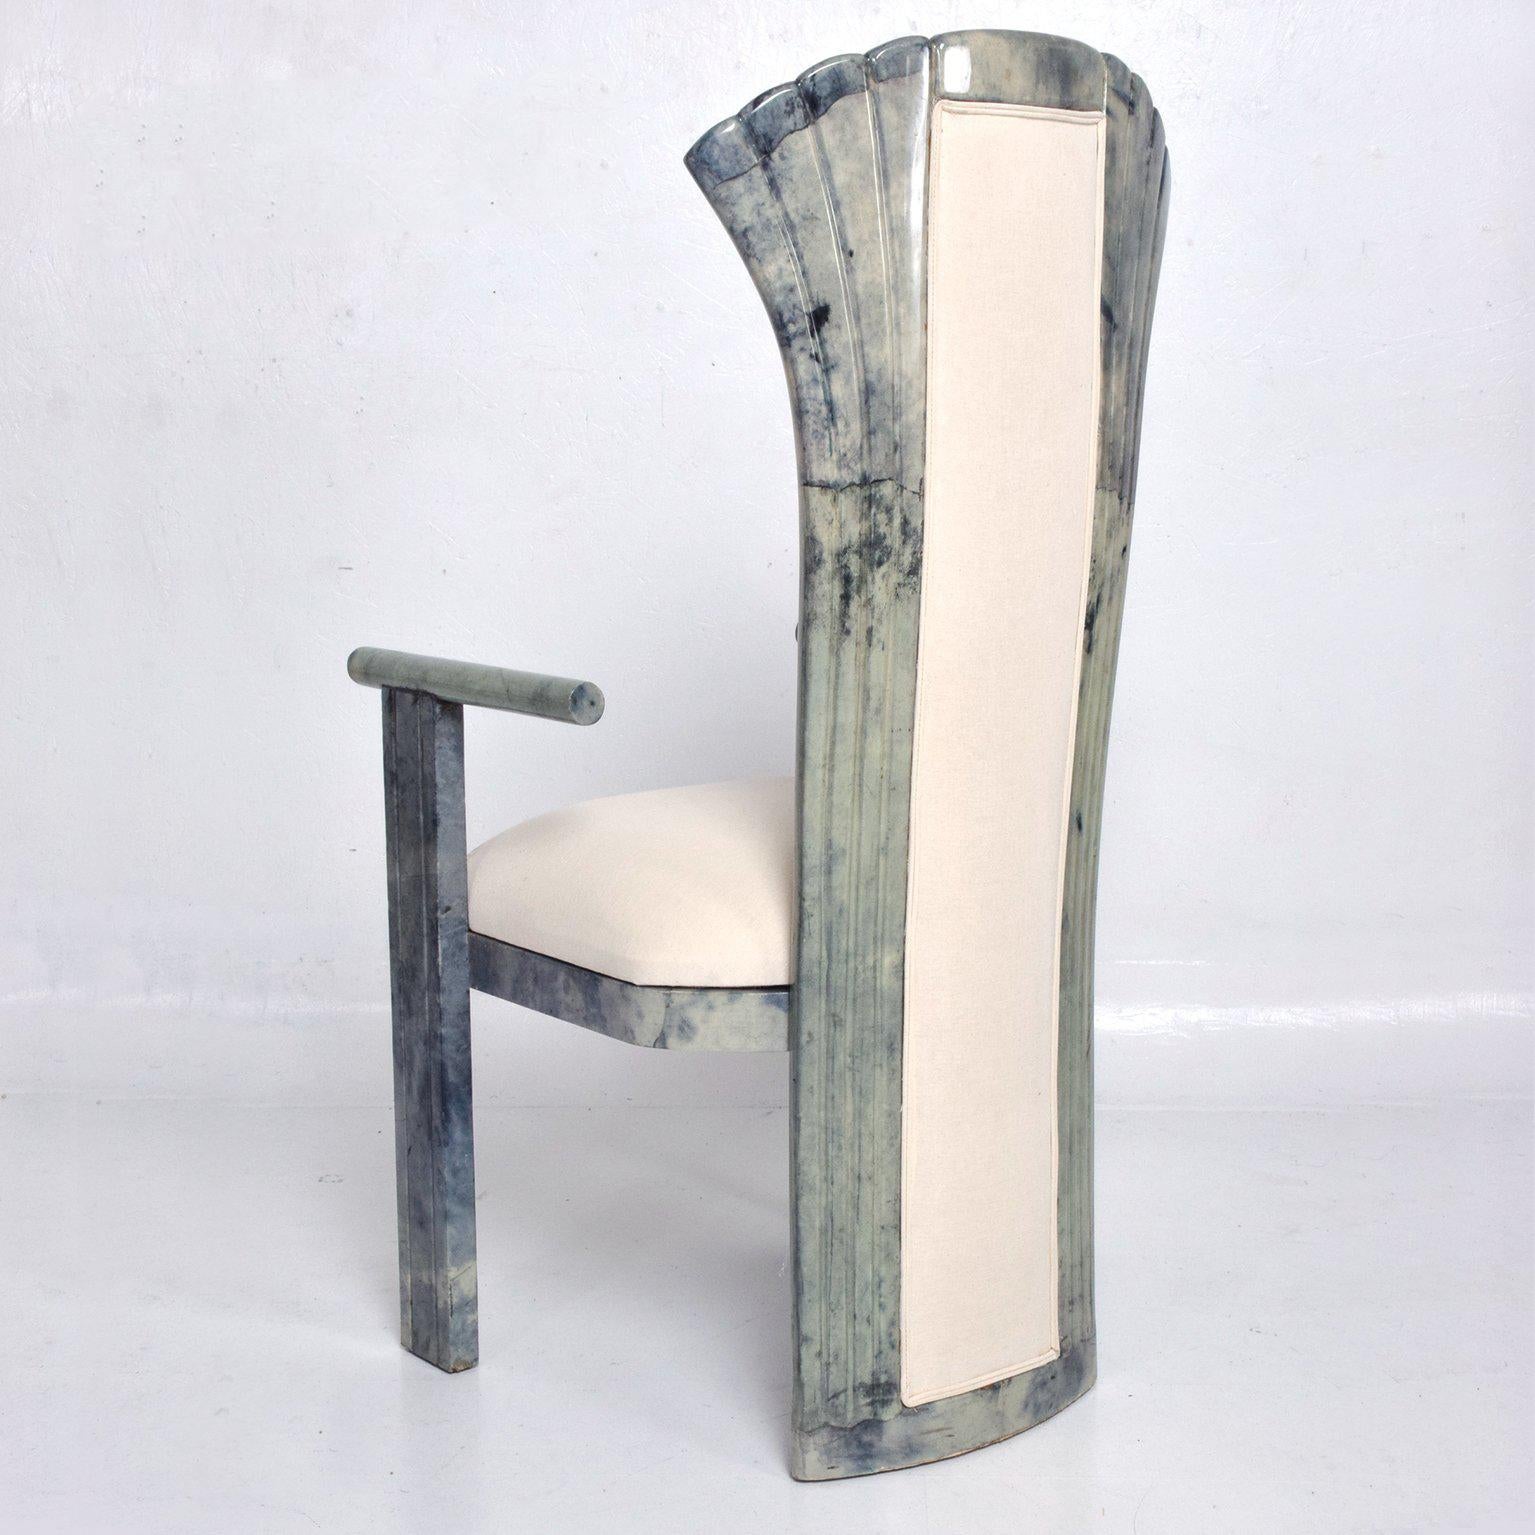 For your consideration a set of ten dining chairs in goatskin/parchment in grey tone. 
Chairs have the original upholstery (price includes the upholstery labor, customer to provide the fabric).

No label or information from the maker.